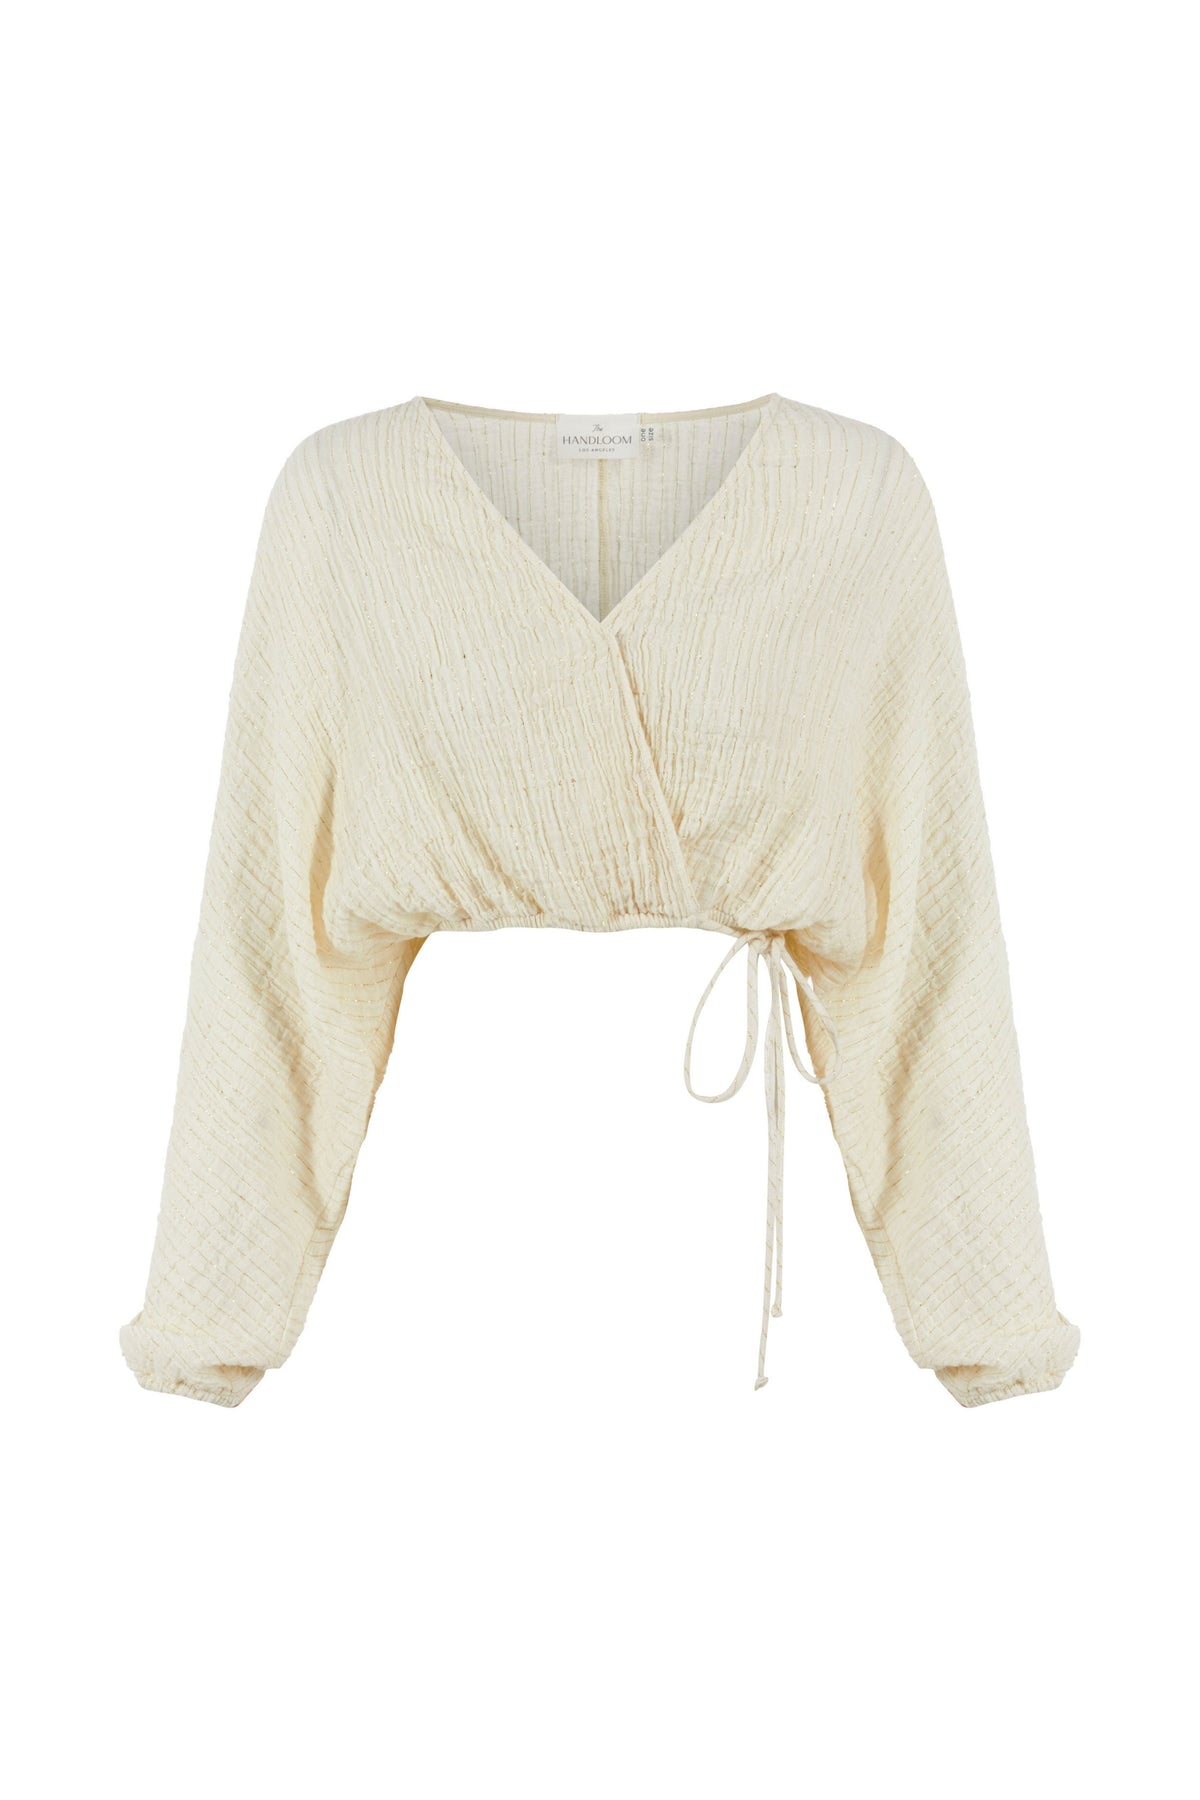 THE HAND LOOM Siena Top - Natural with Gold Stripes